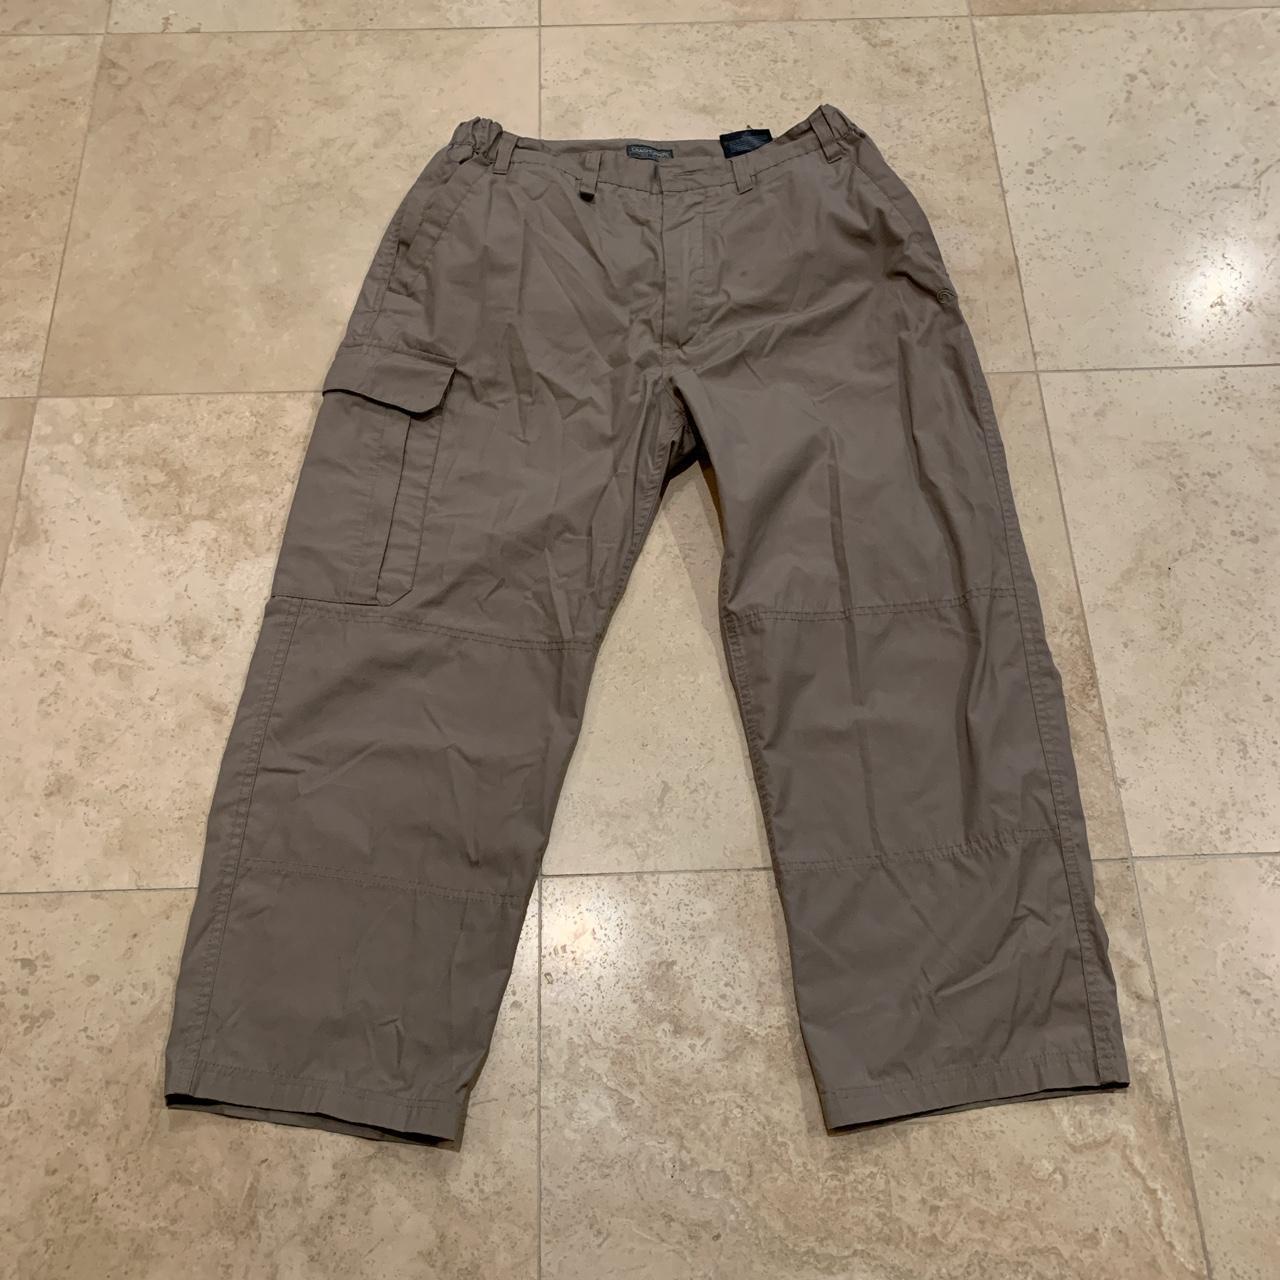 90s Craghoppers Cargo Pants, open to offers, message... - Depop